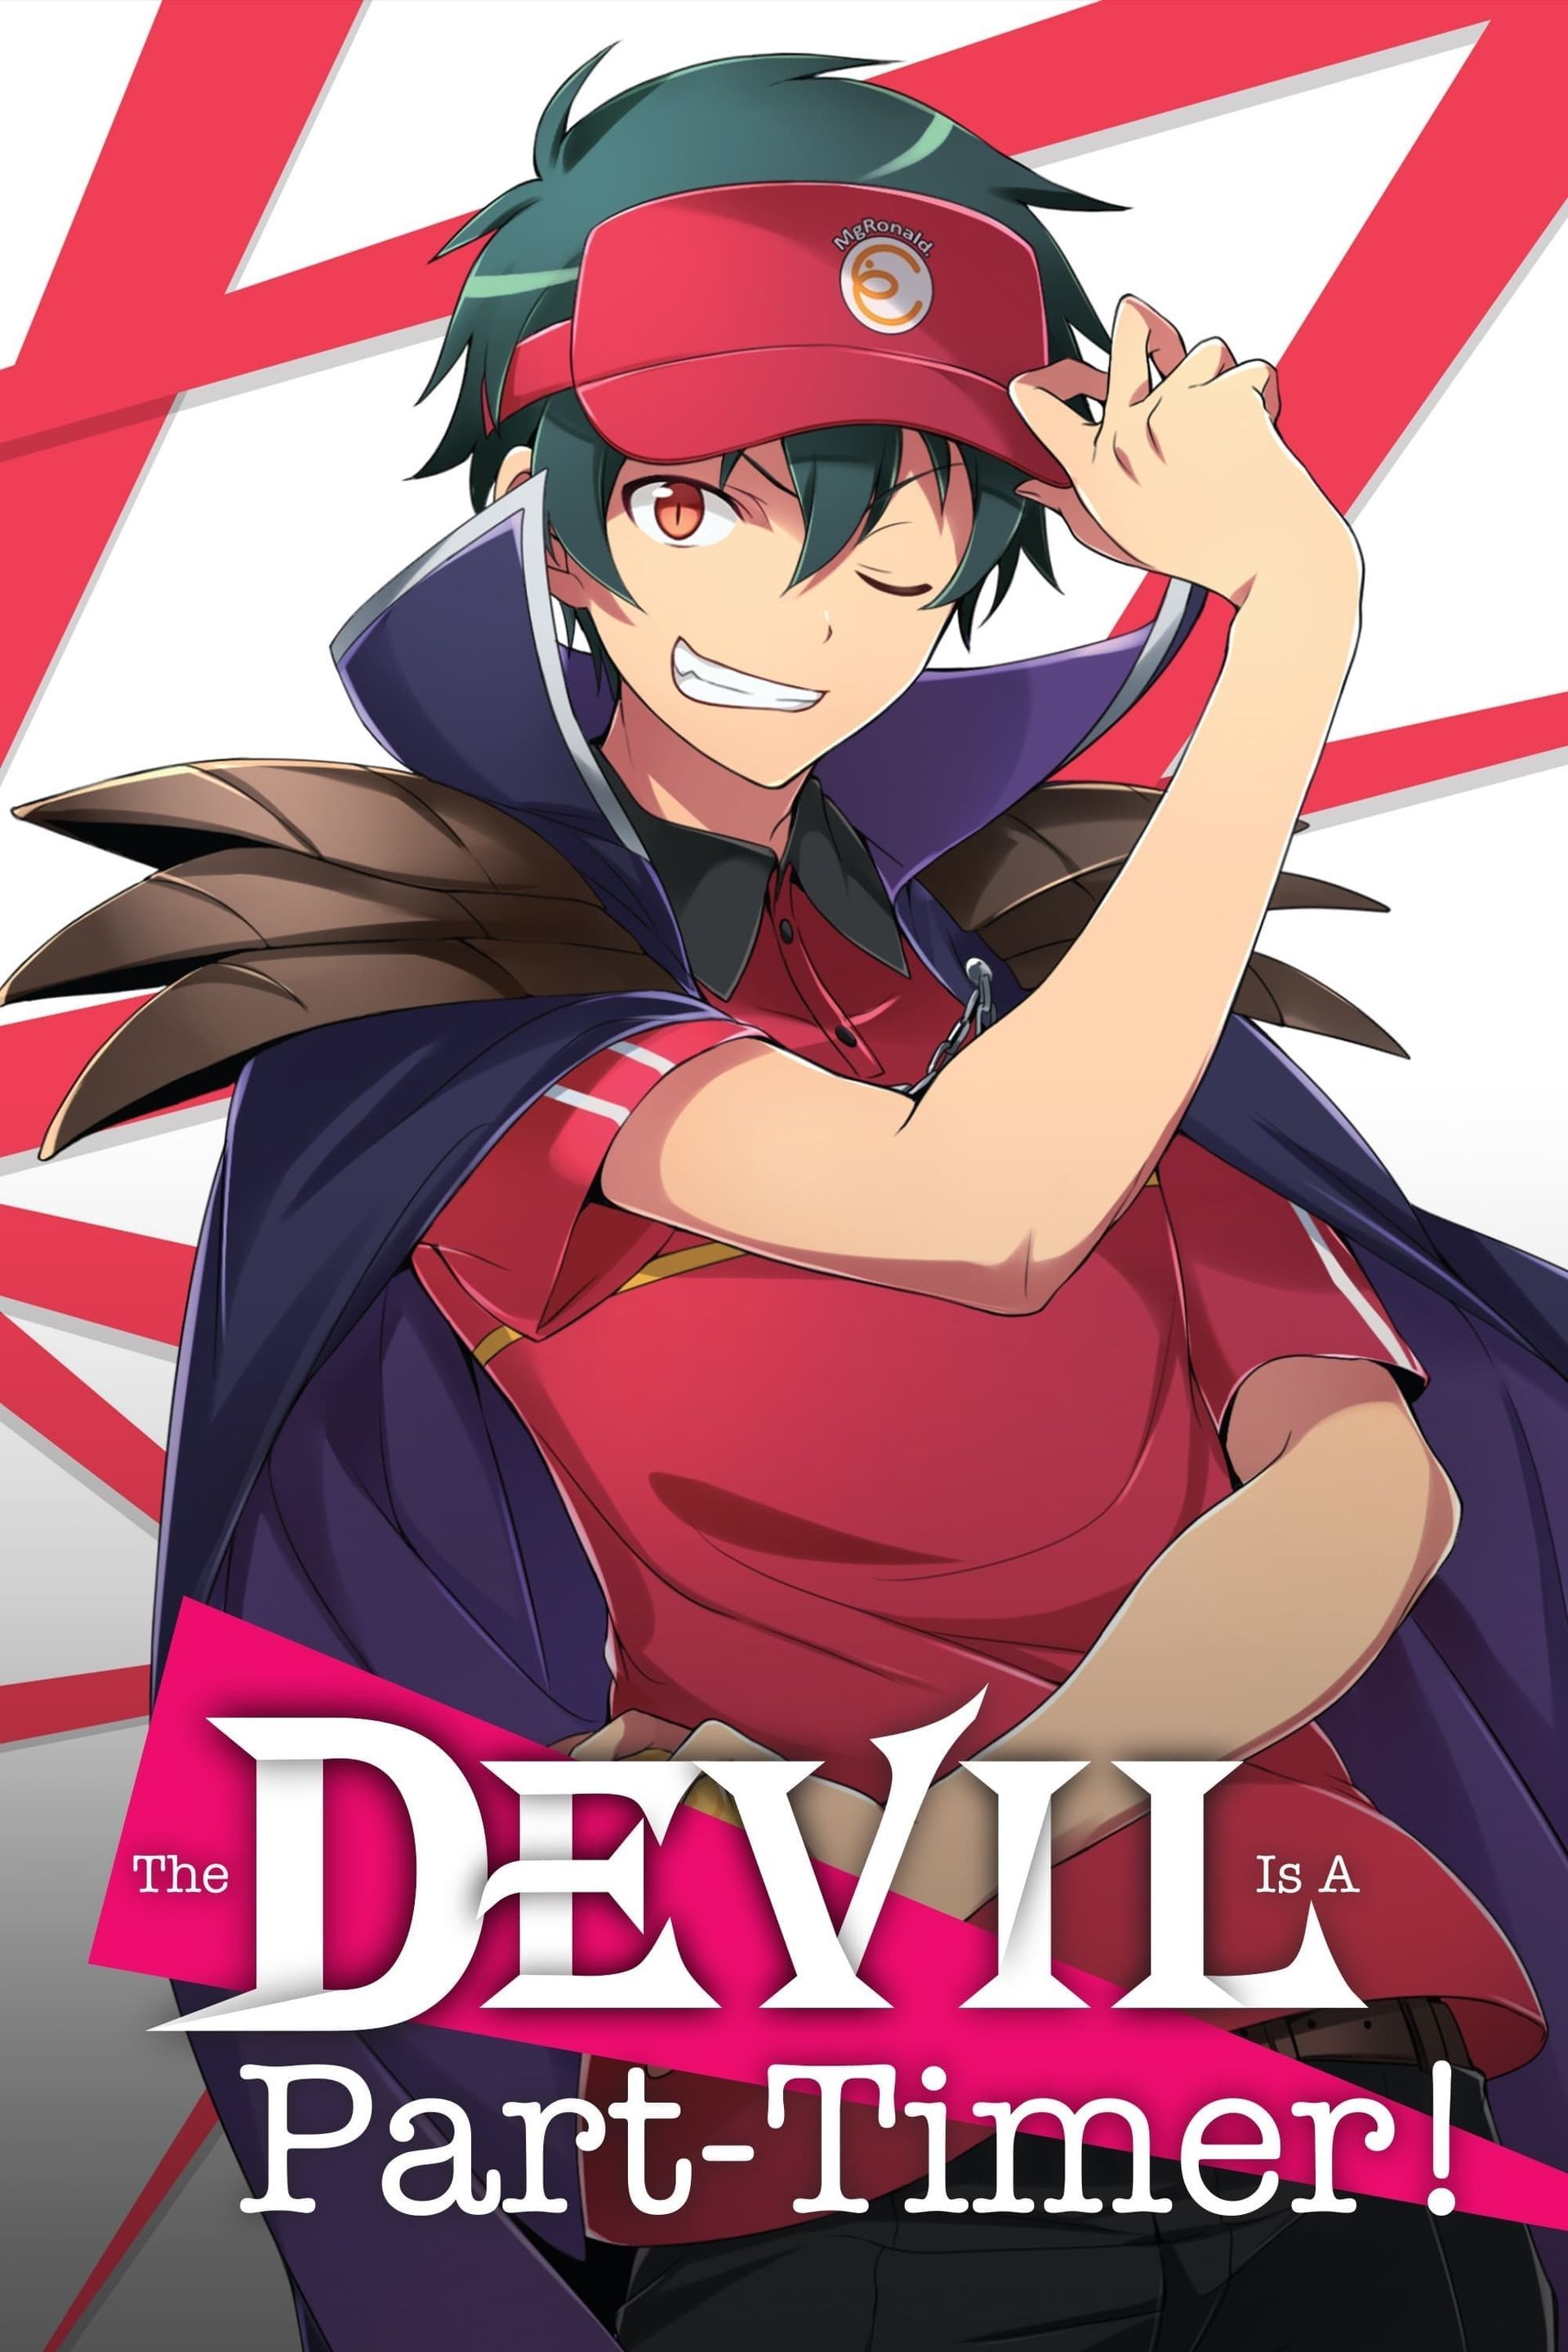 The Devil is a Part-Timer  Gentlemanotoku's Anime Circle